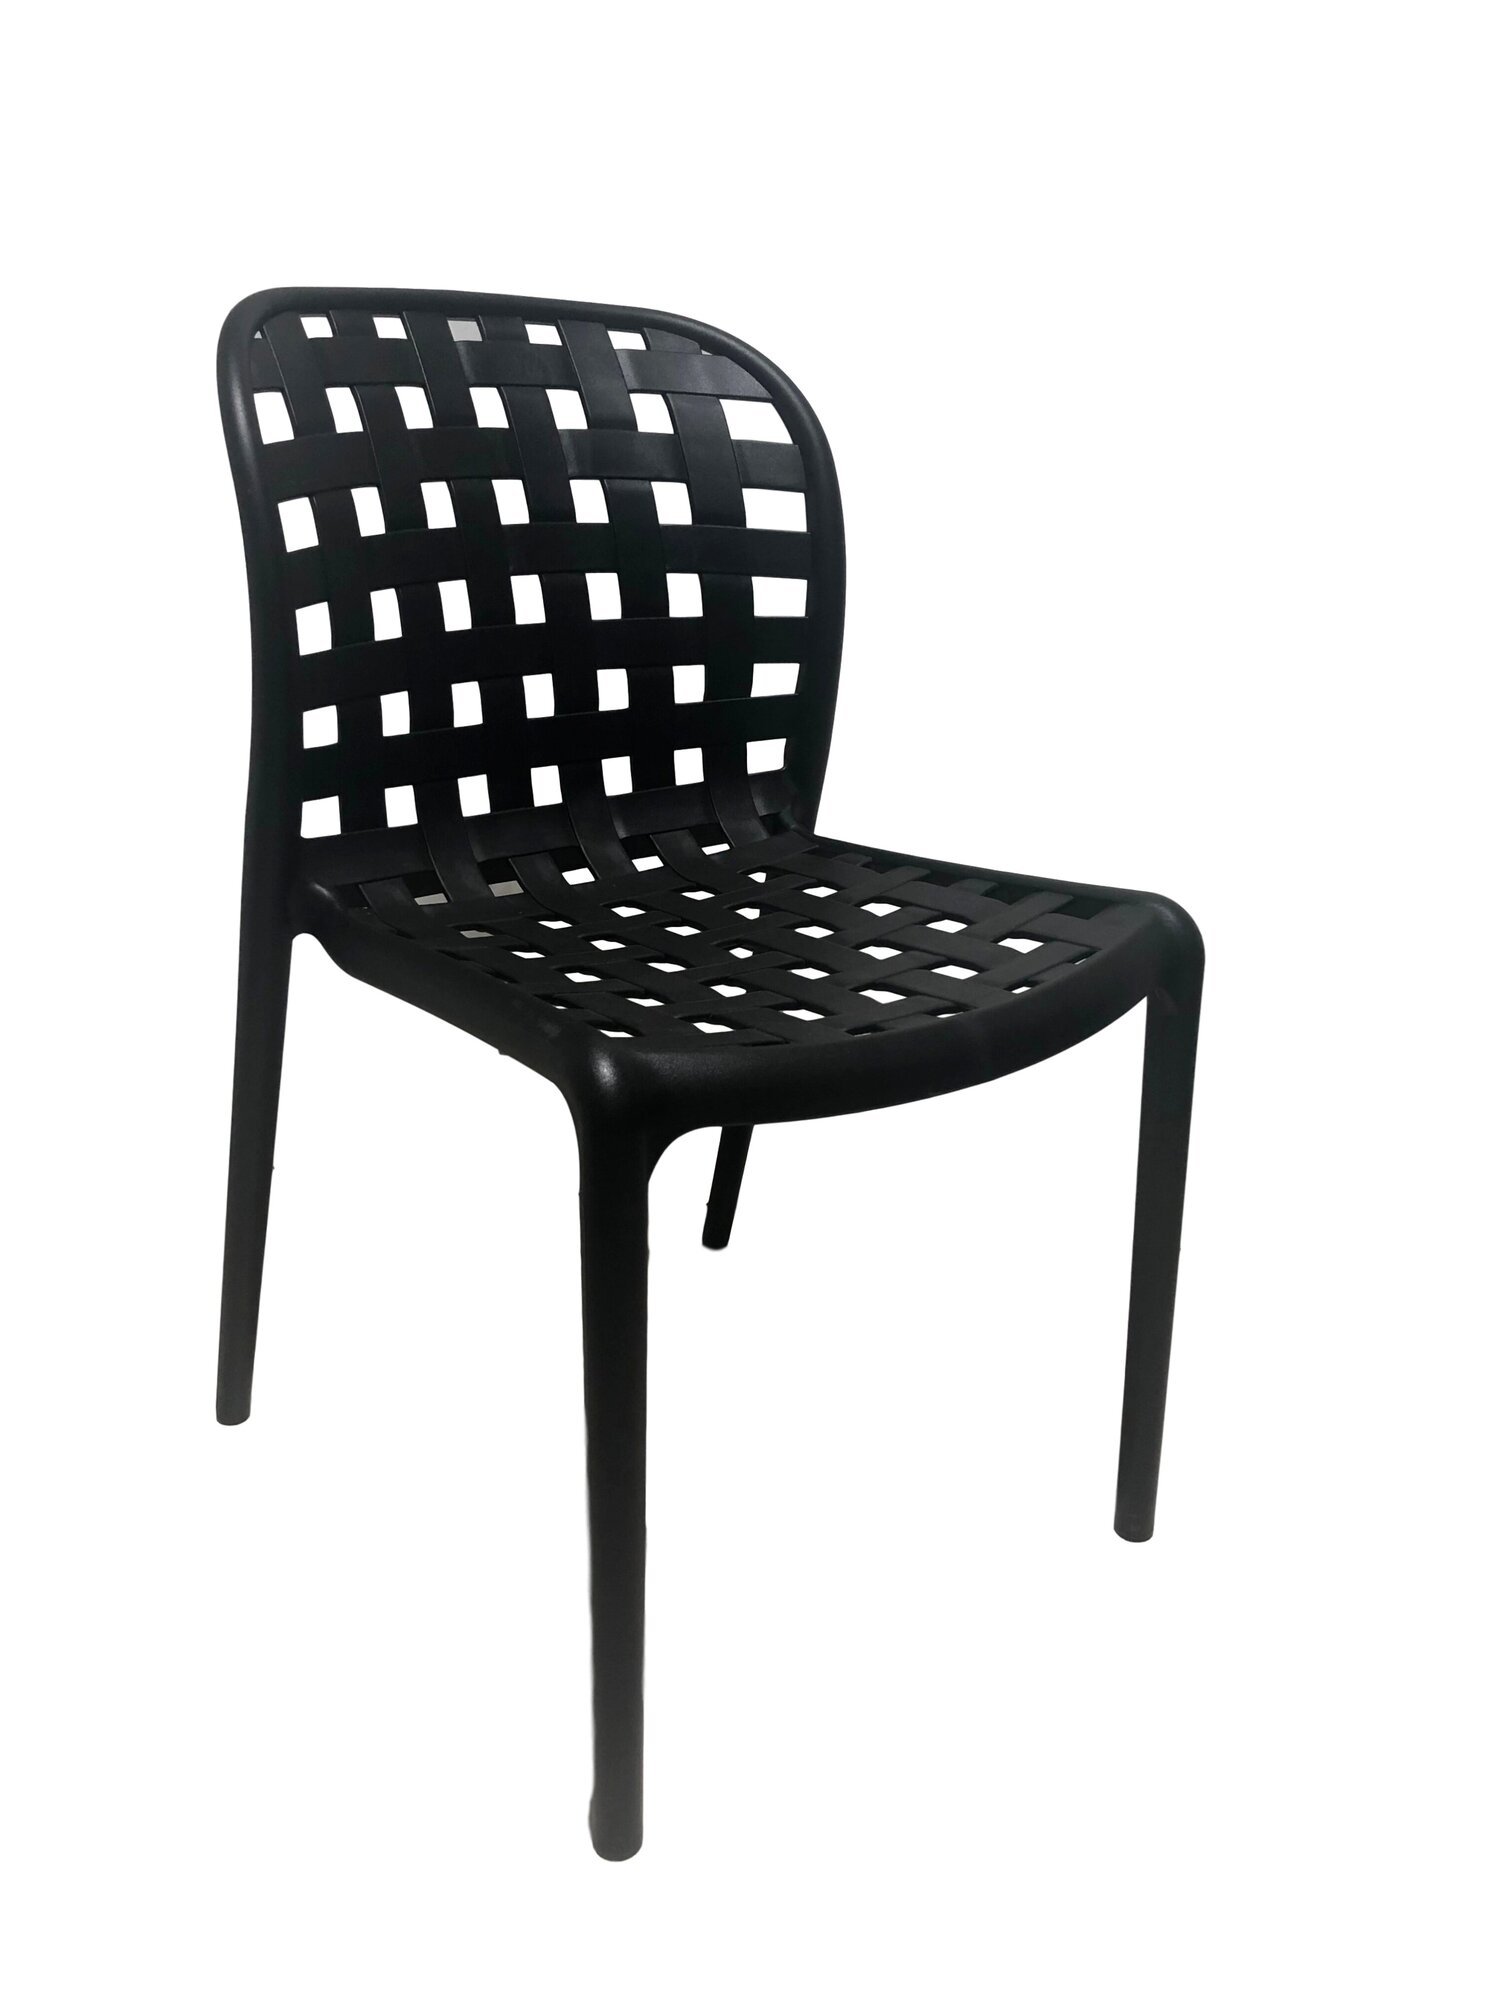 Outdoor Chairs Stackable, Black Plastic Outdoor Chairs Australia